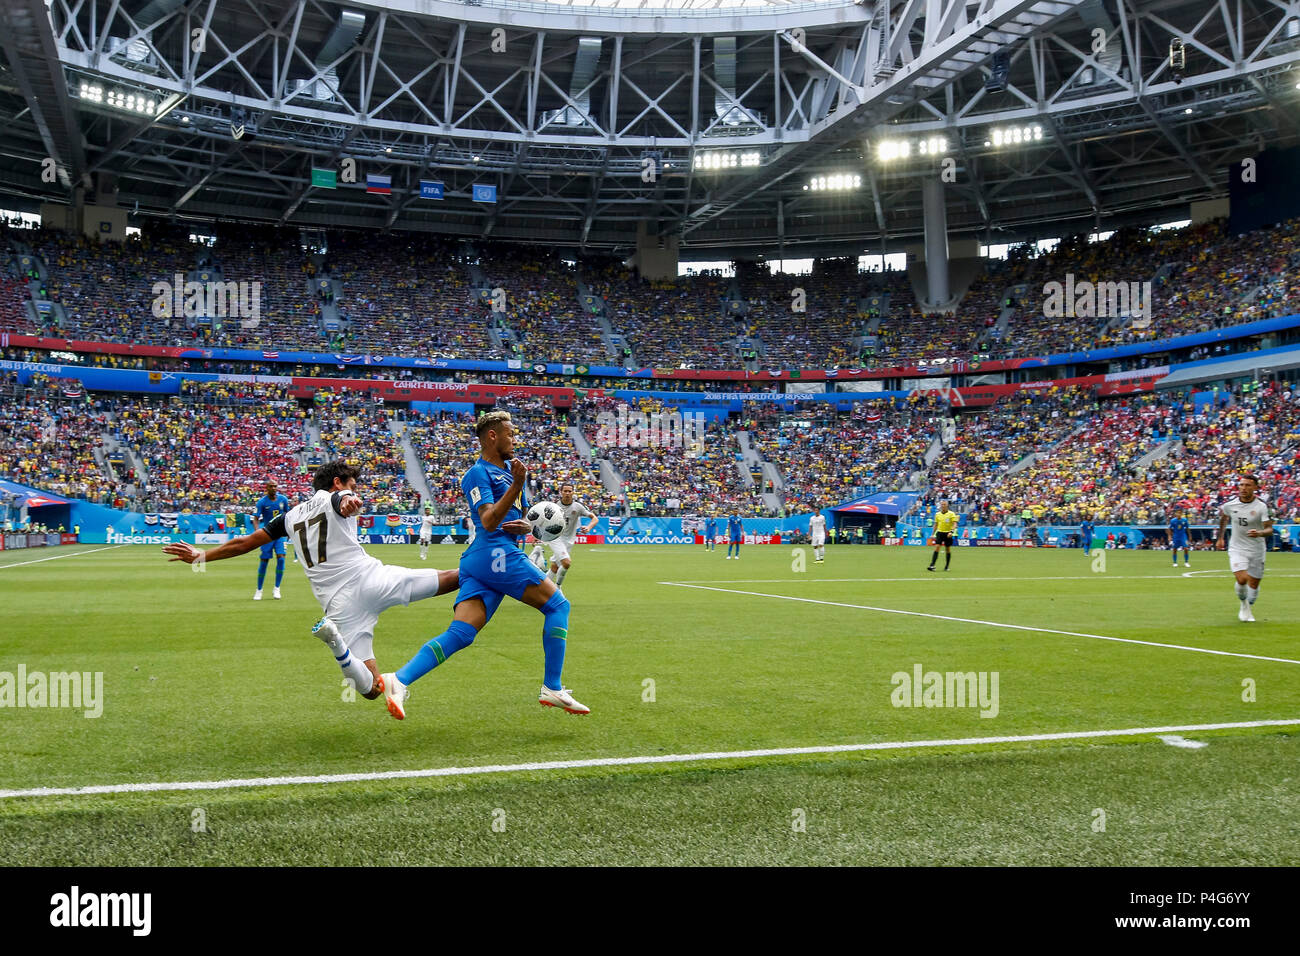 St Petersburg, Russia. 22nd June, 2018. Neymar of Brazil flicks the ball over Yeltsin Tejeda of Costa Rica during the 2018 FIFA World Cup Group E match between Brazil and Costa Rica at Saint Petersburg Stadium on June 22nd 2018 in Saint Petersburg, Russia. (Photo by Daniel Chesterton/phcimages.com) Credit: PHC Images/Alamy Live News Stock Photo